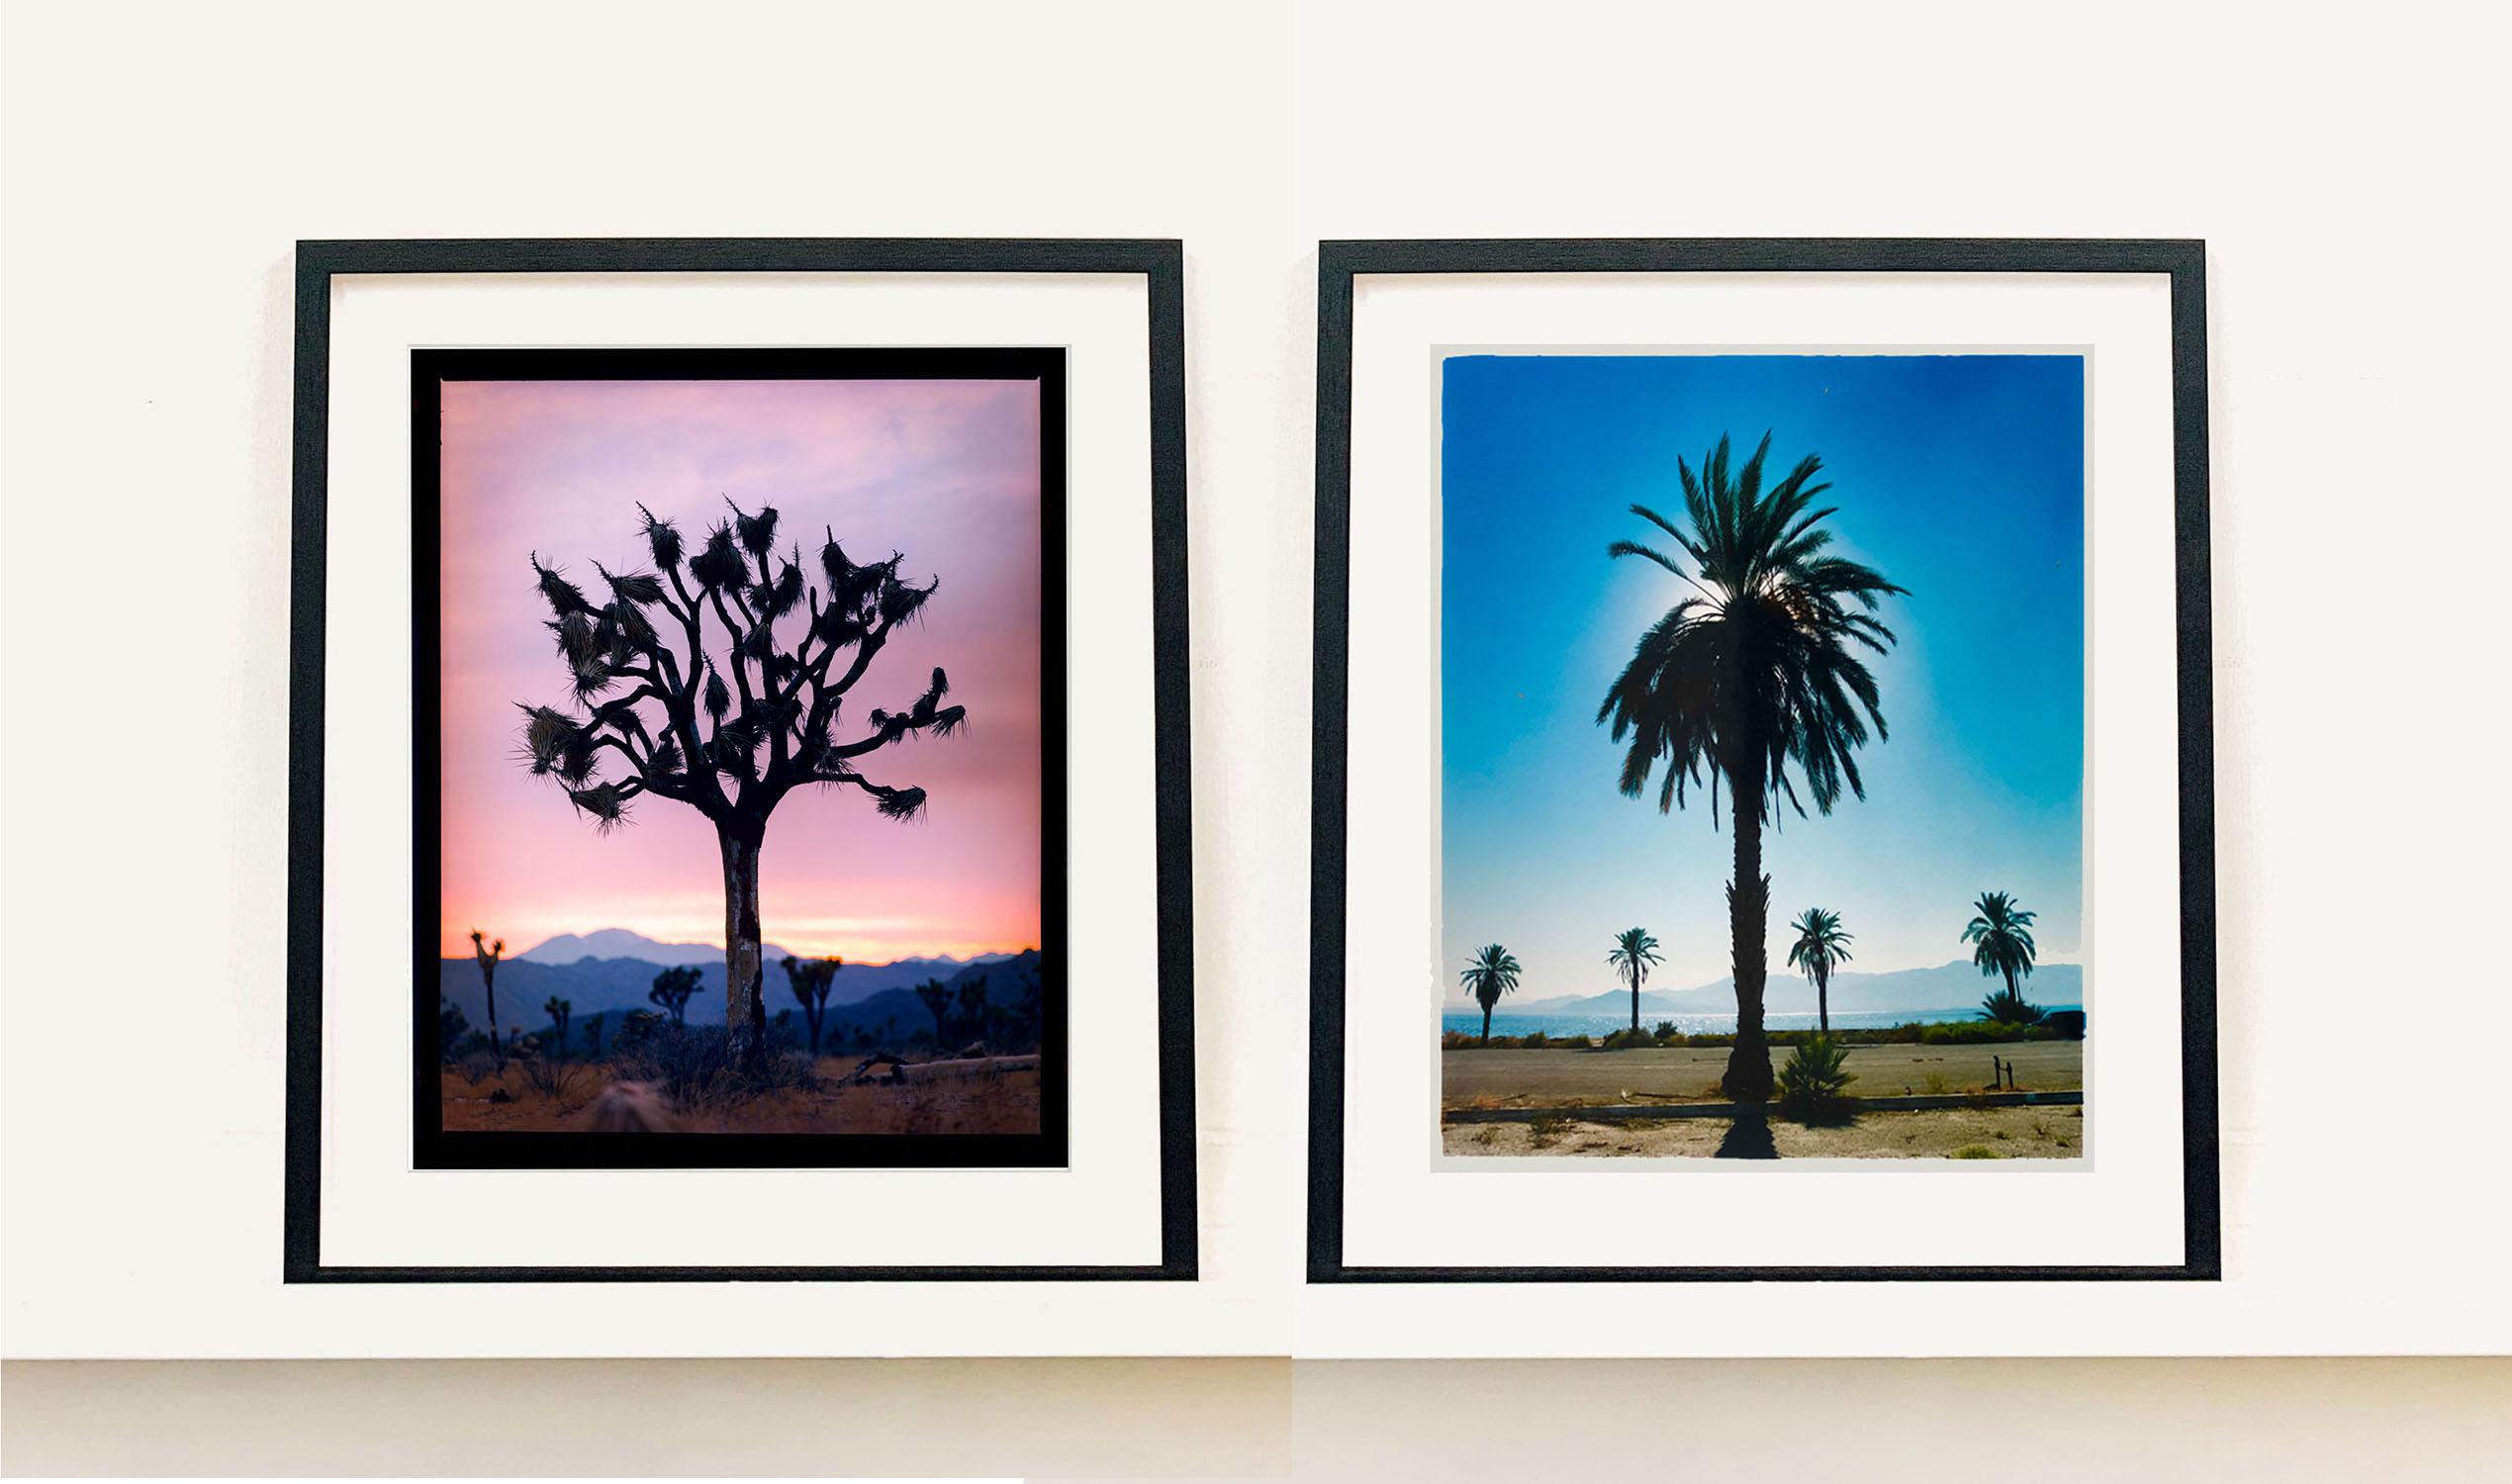 You can feel the heat in this classic Palm Tree Print, the almost silhouette of the Palm Tree against the saturated blue sky takes you to a hot sultry day.

This artwork is a limited edition of 25, gloss photographic print, dry-mounted to aluminium,